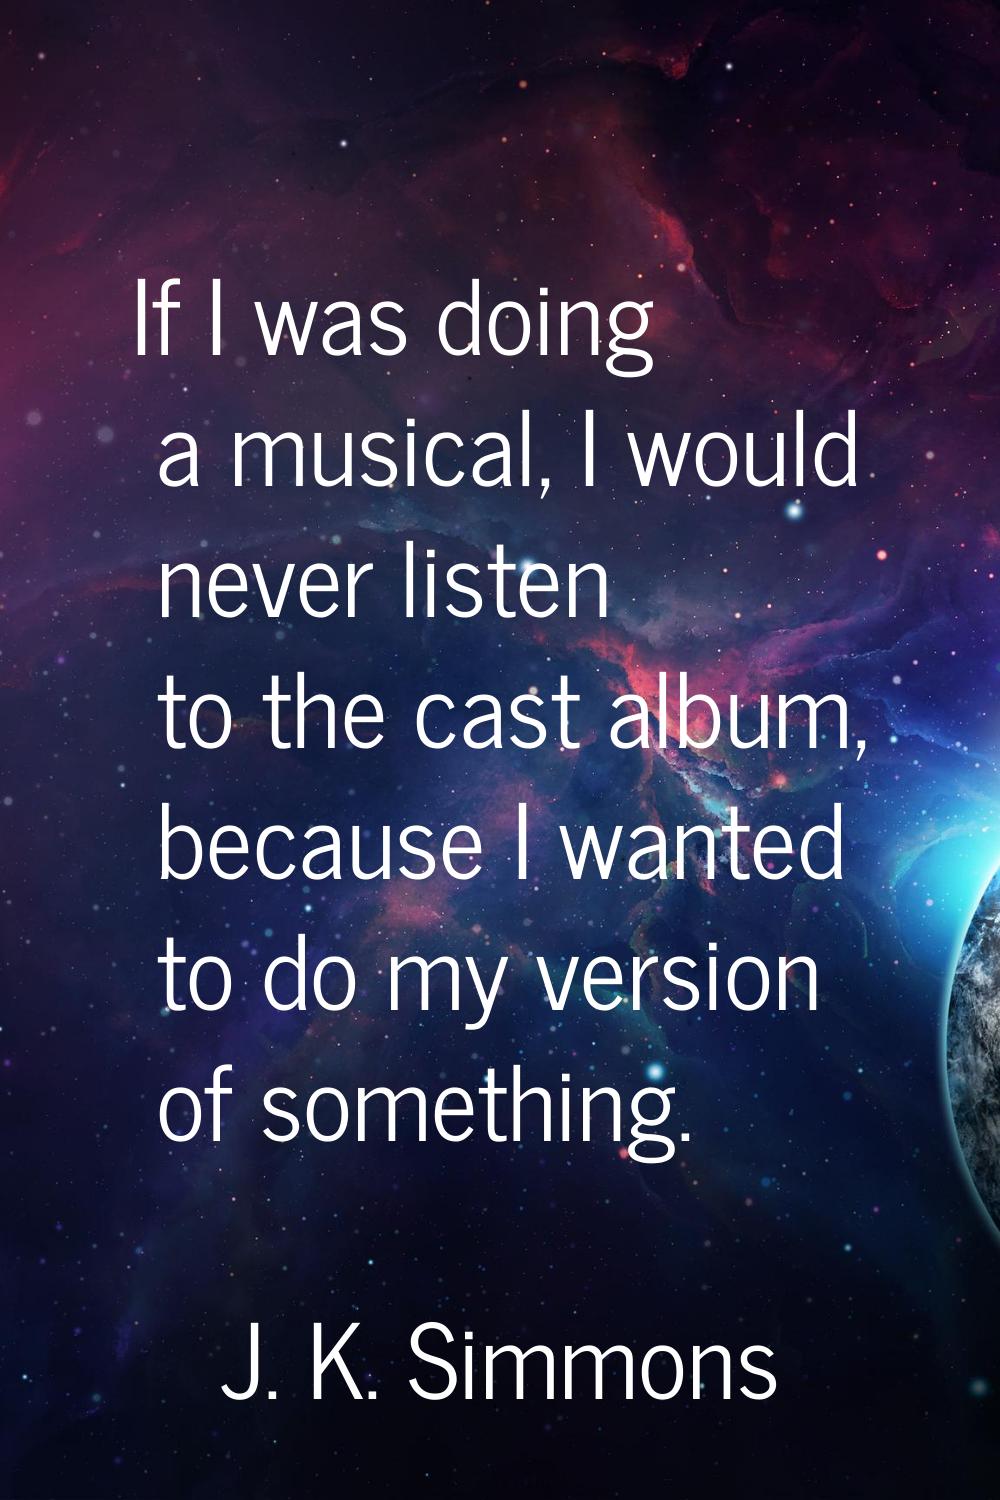 If I was doing a musical, I would never listen to the cast album, because I wanted to do my version